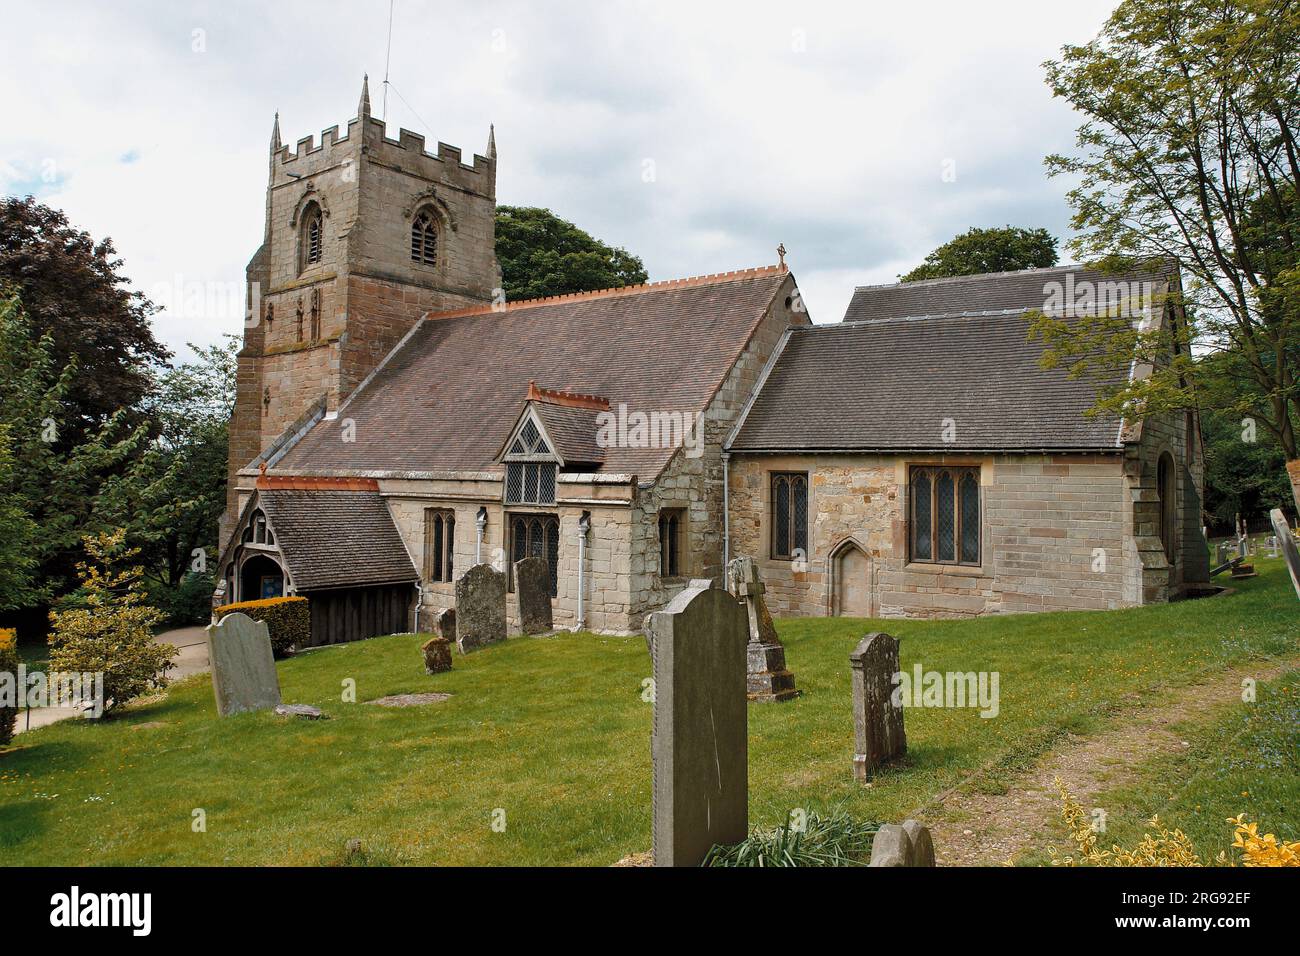 View of Beoley Church near Redditch, Worcestershire, across the cemetery.  The church is dedicated to St Leonard. Stock Photo